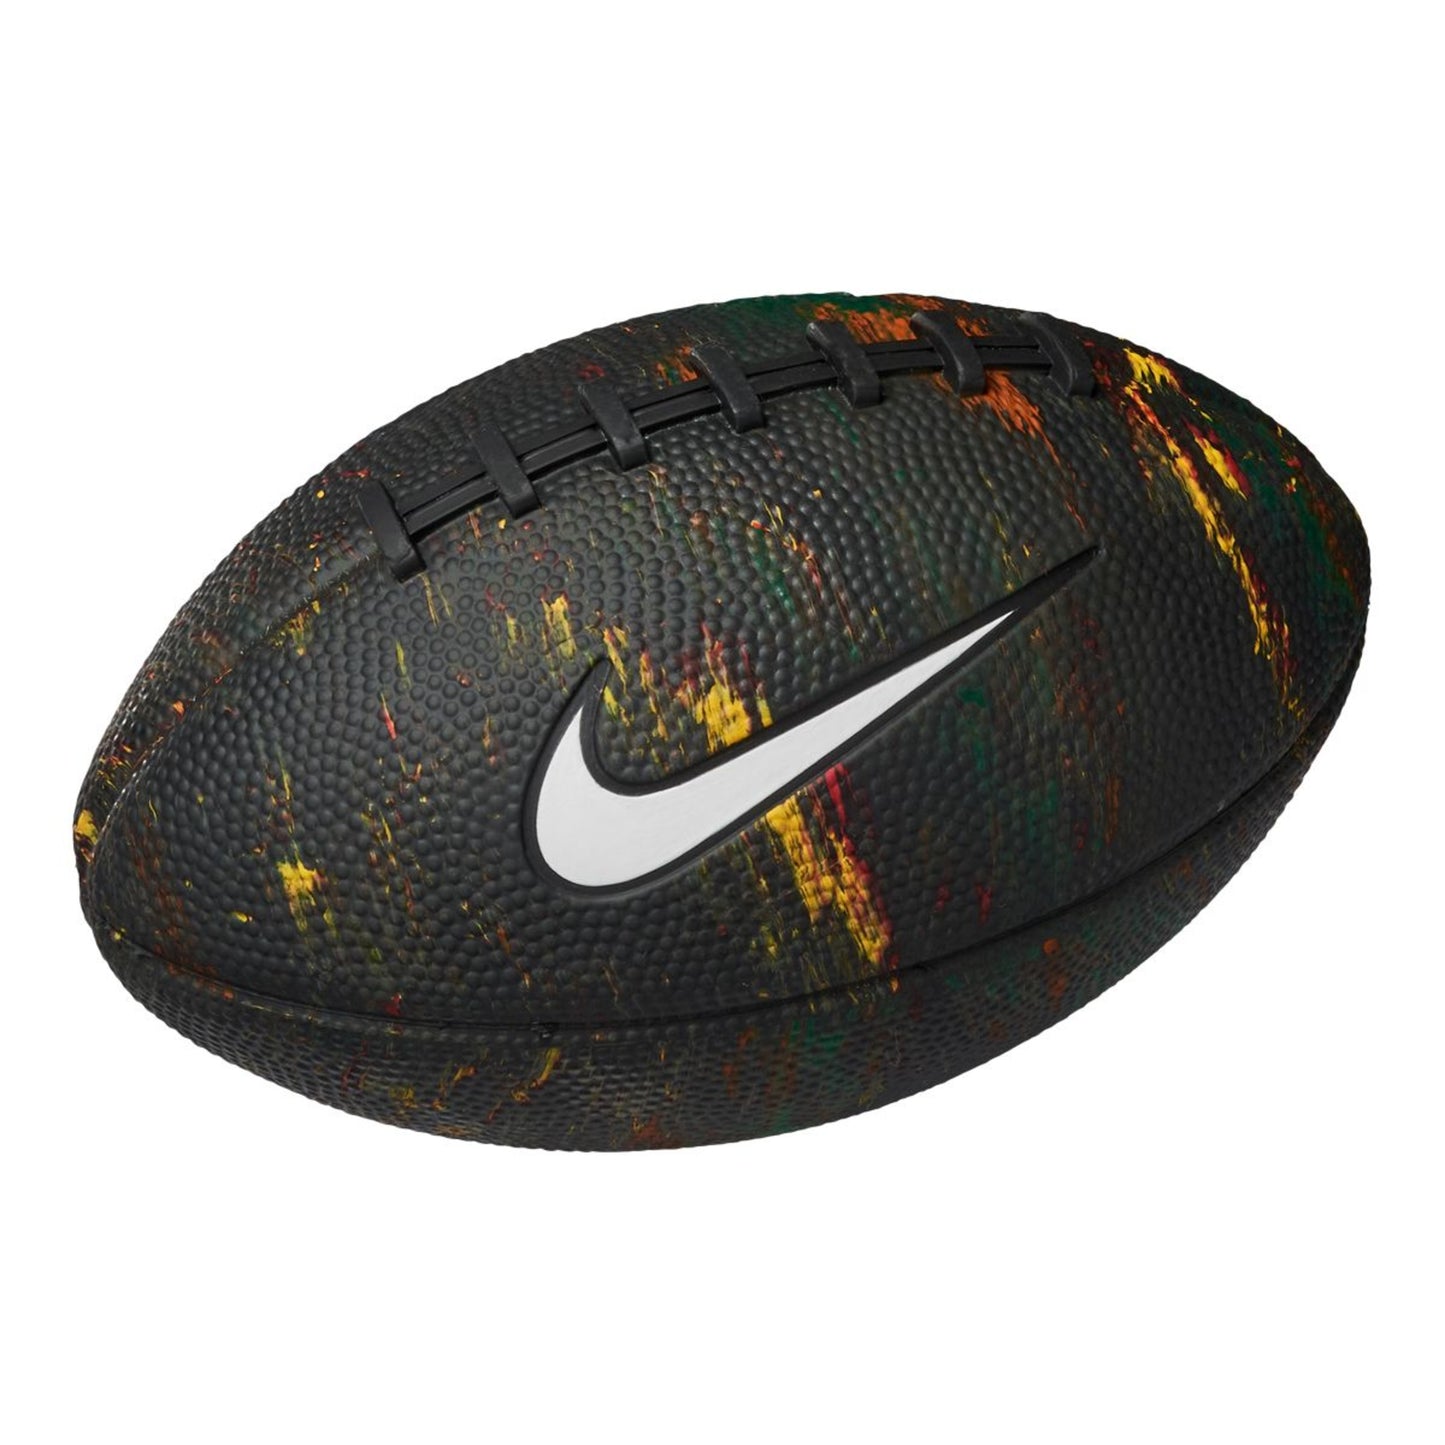 A photo of the Nike Next Nature Playground Football. It is in the colour black, with yellow, orange, red and green paint splatters.